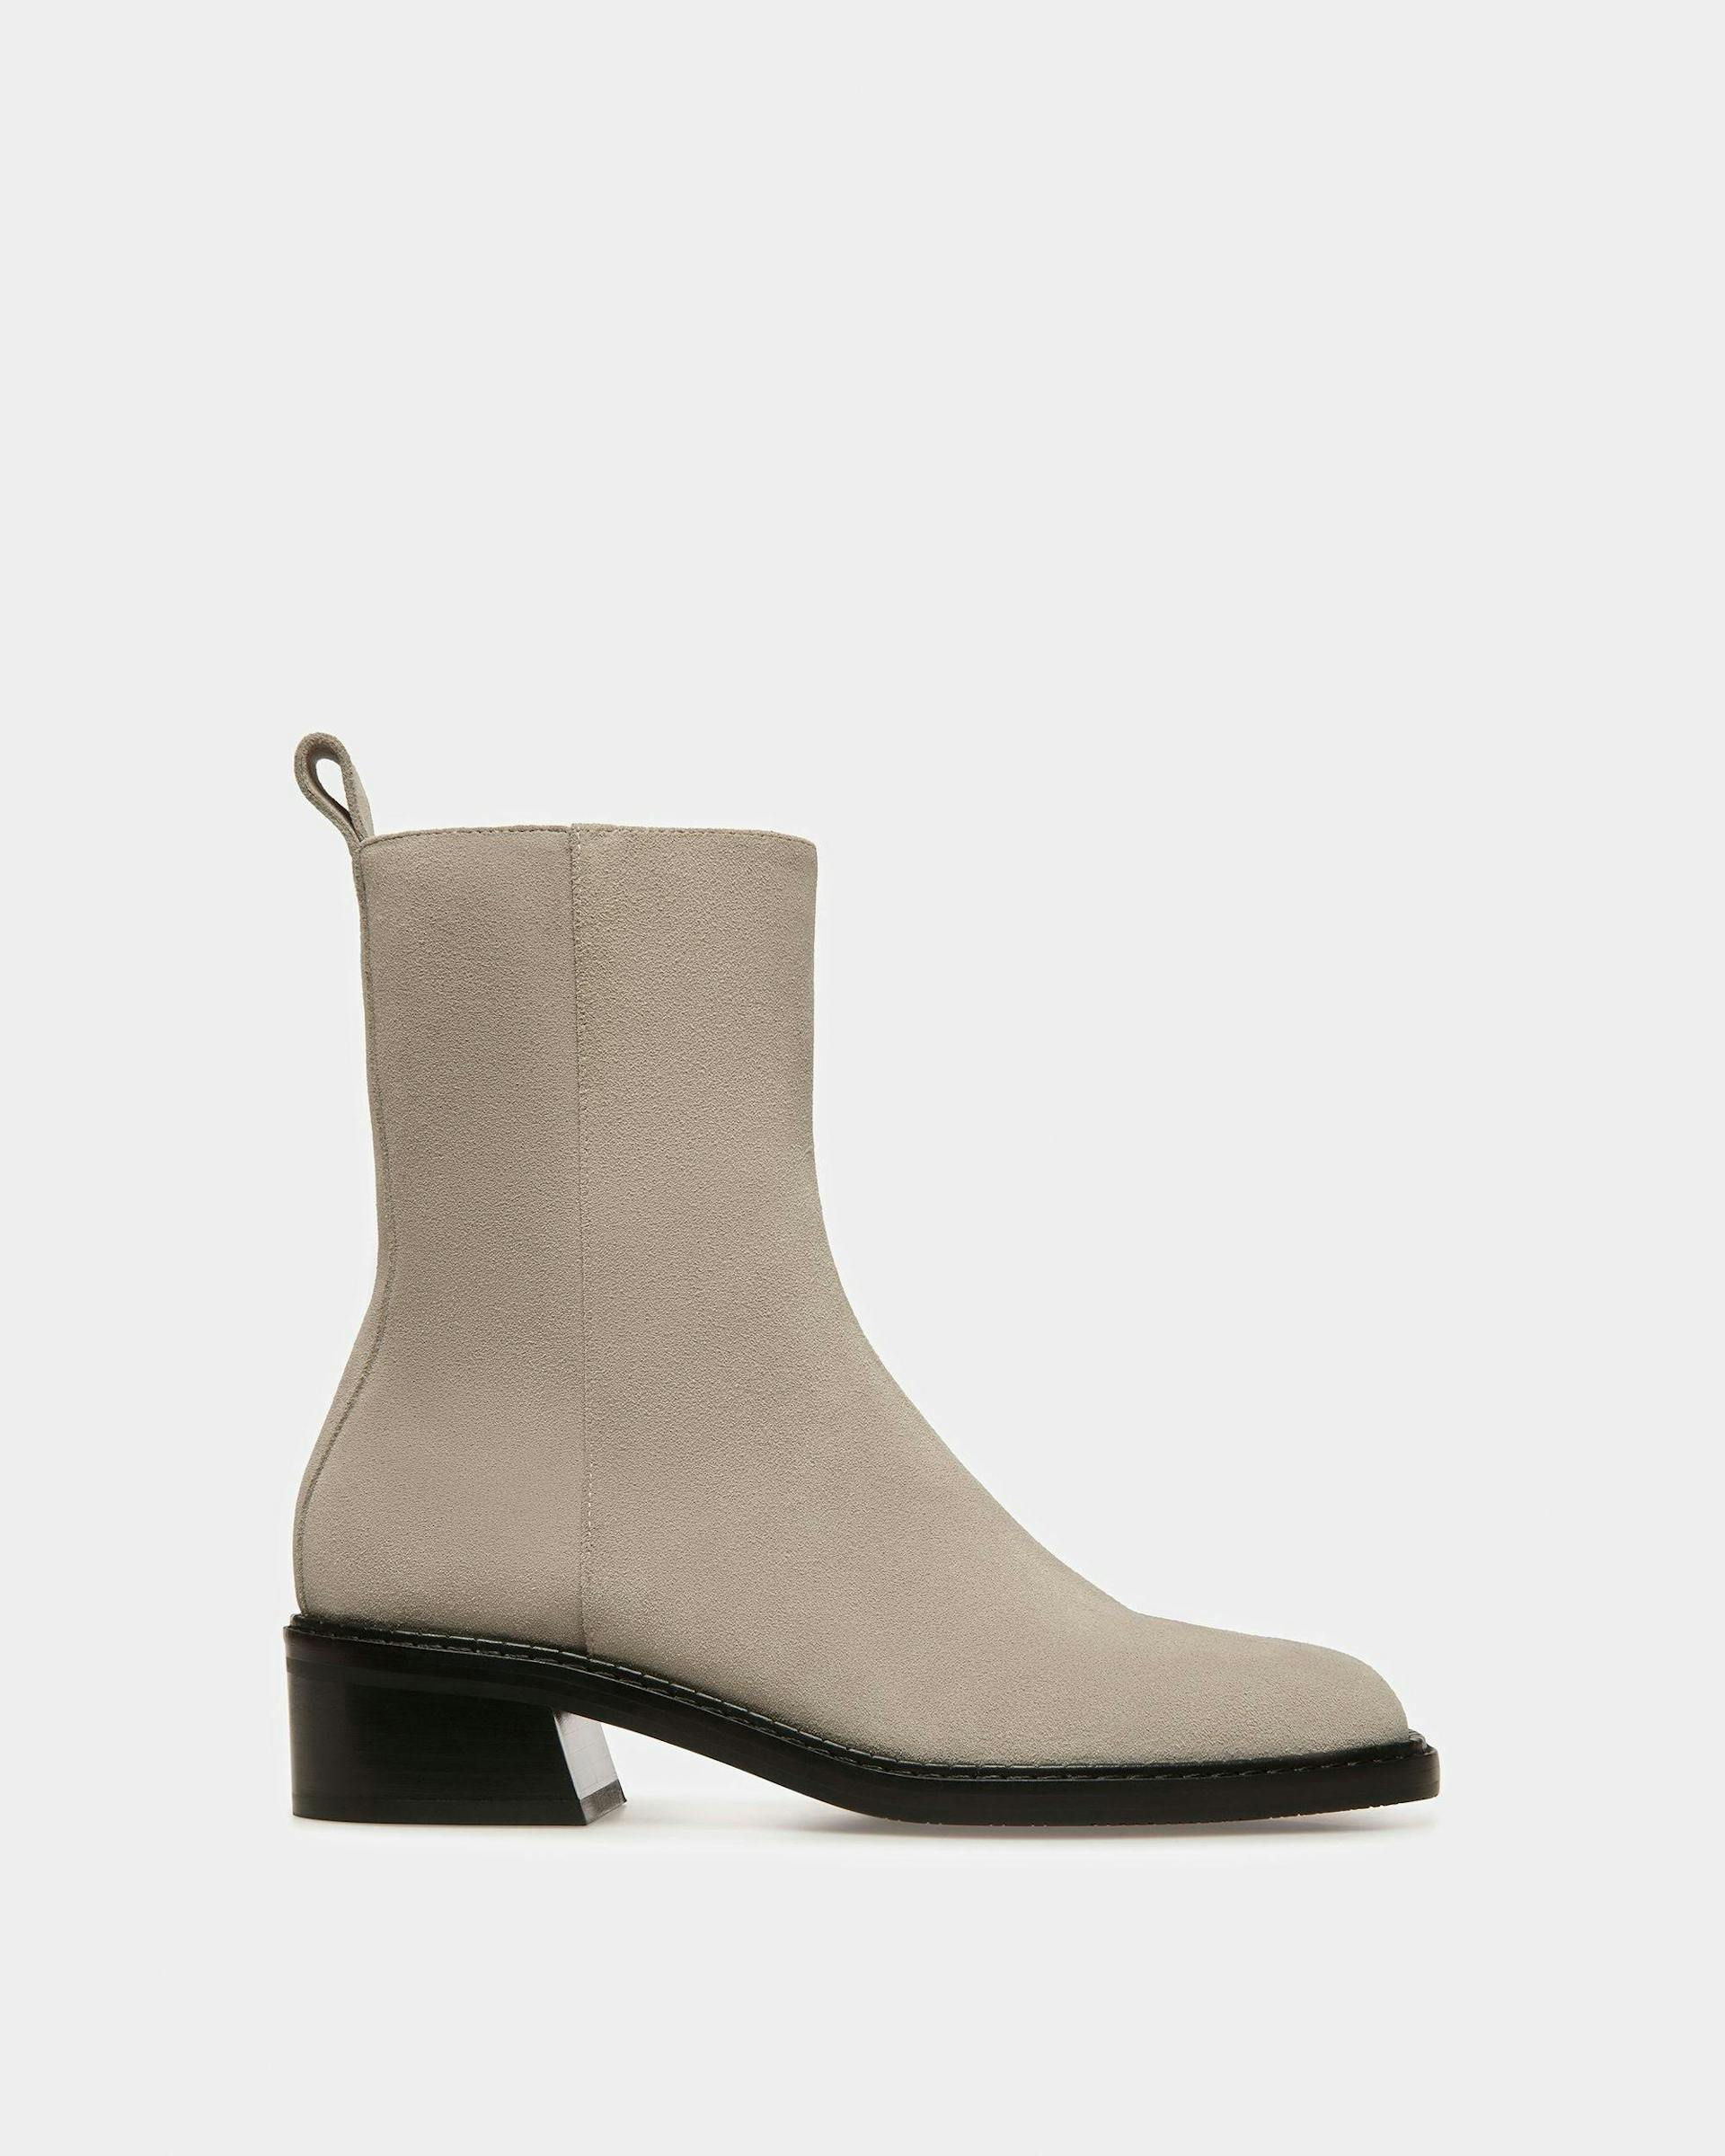 Austine Leather Boots In Stone - Women's - Bally - 01